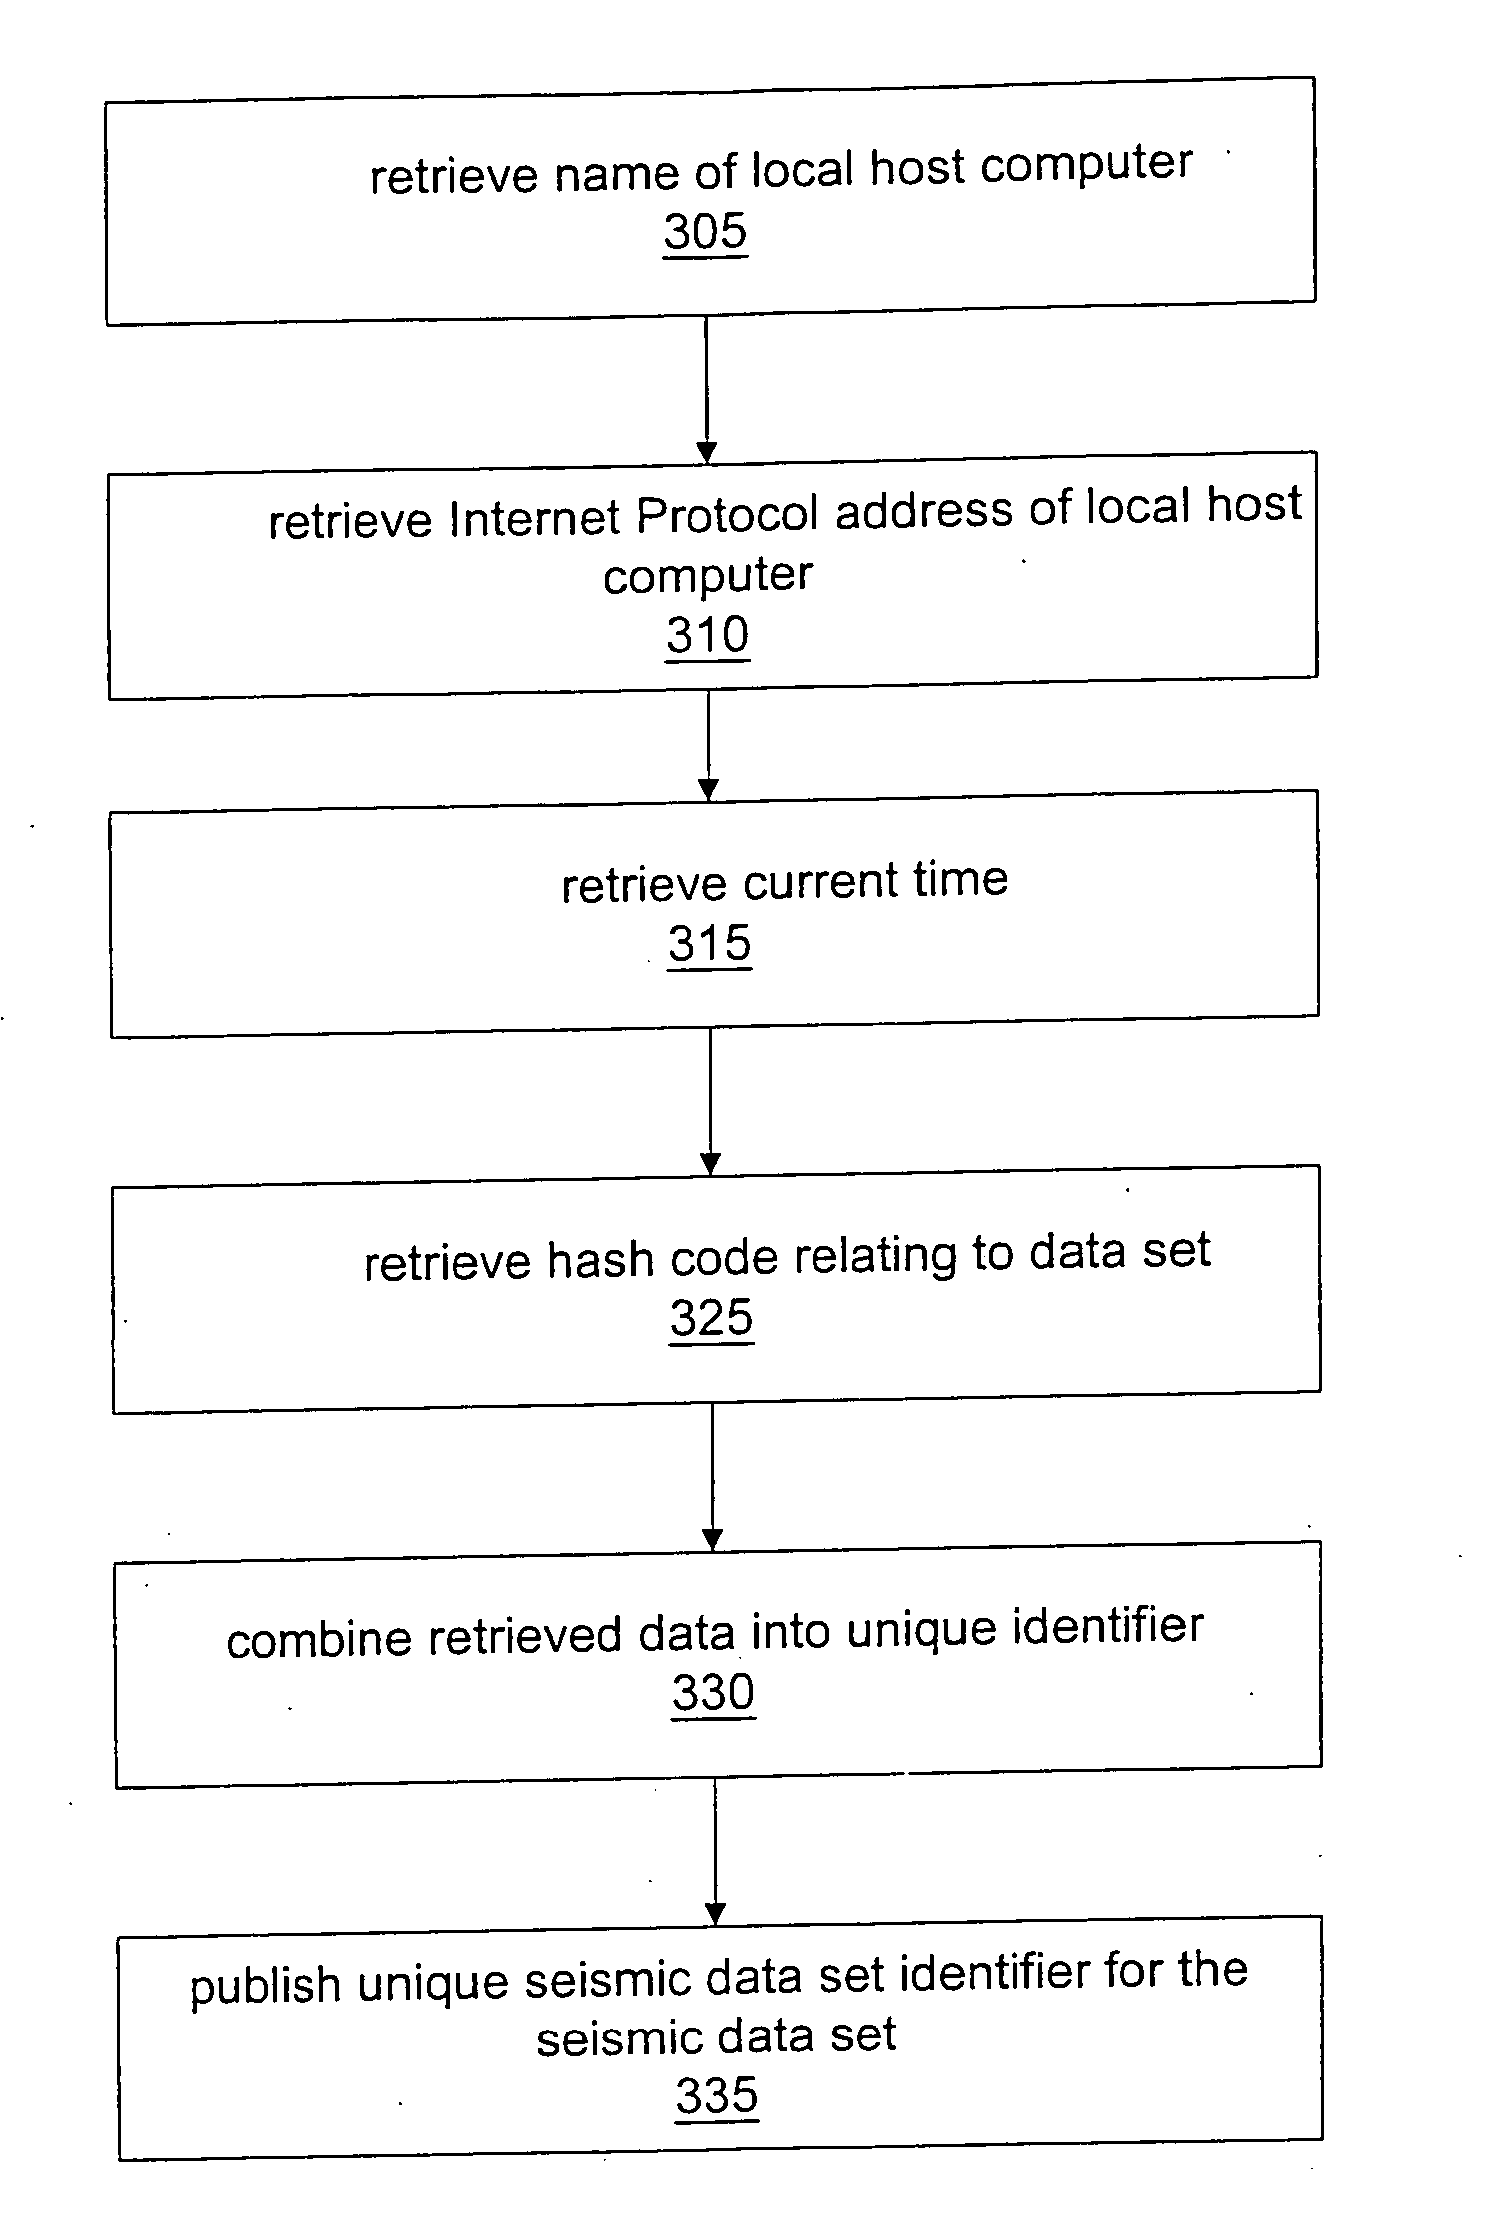 System and method for accessing and analyzing previous generations of seismic data